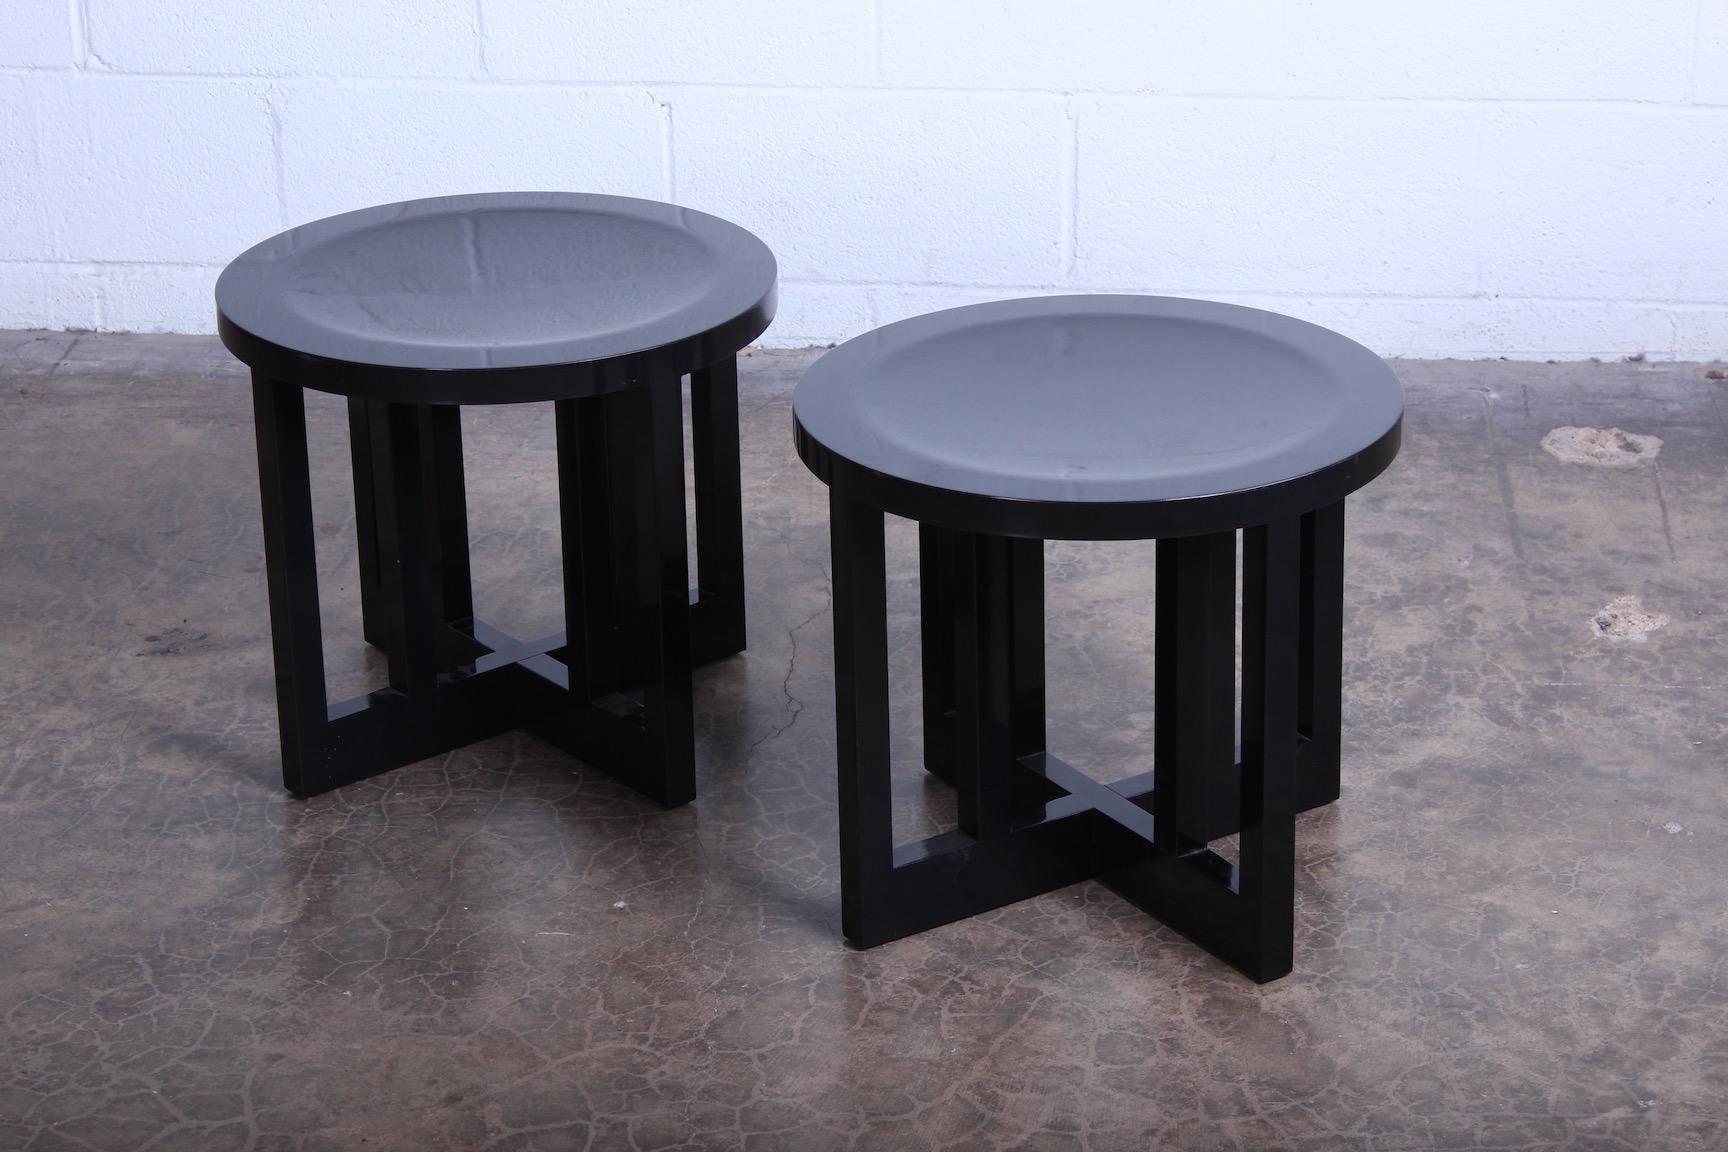 Lacquer Richard Meier for Knoll Stools 